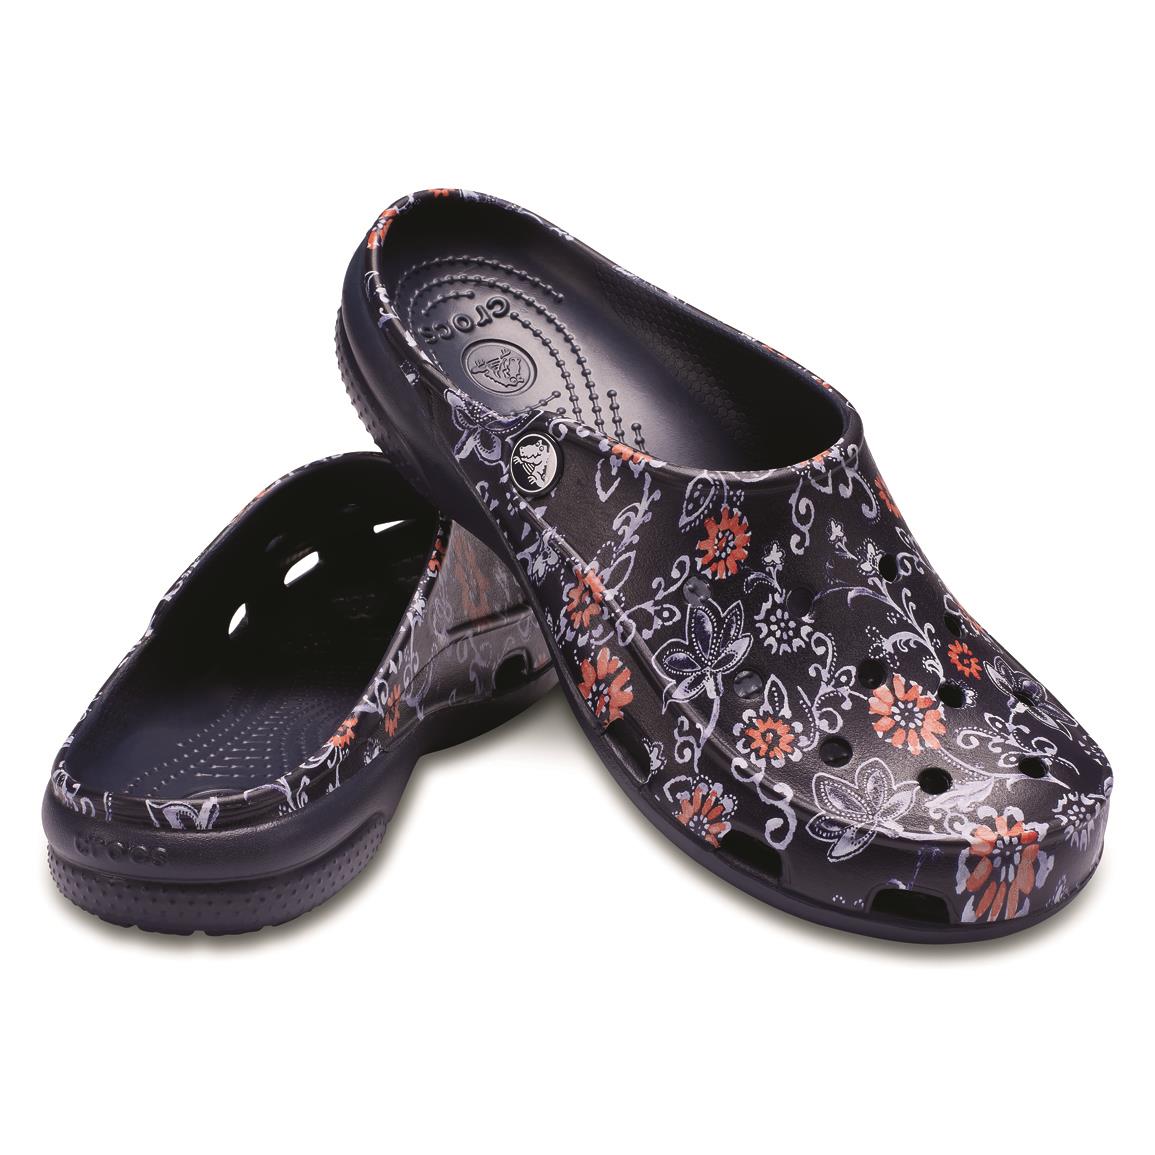  Crocs  Women s  Freesail Clogs 654248 Casual Shoes at 